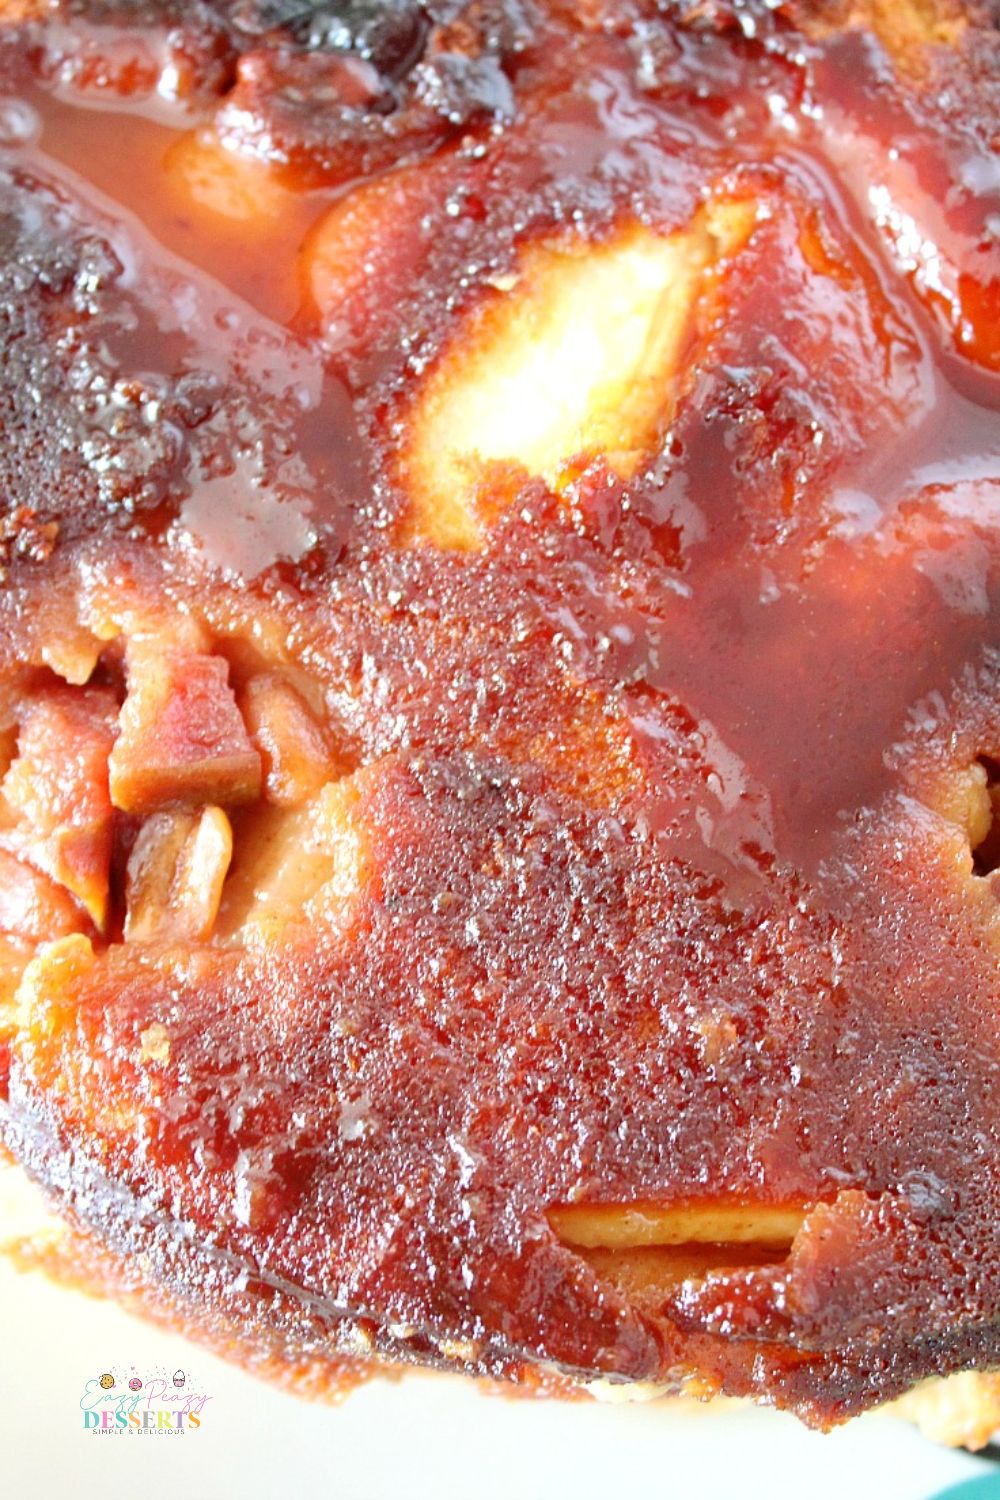 Over head image of a caramel apple upside down cake